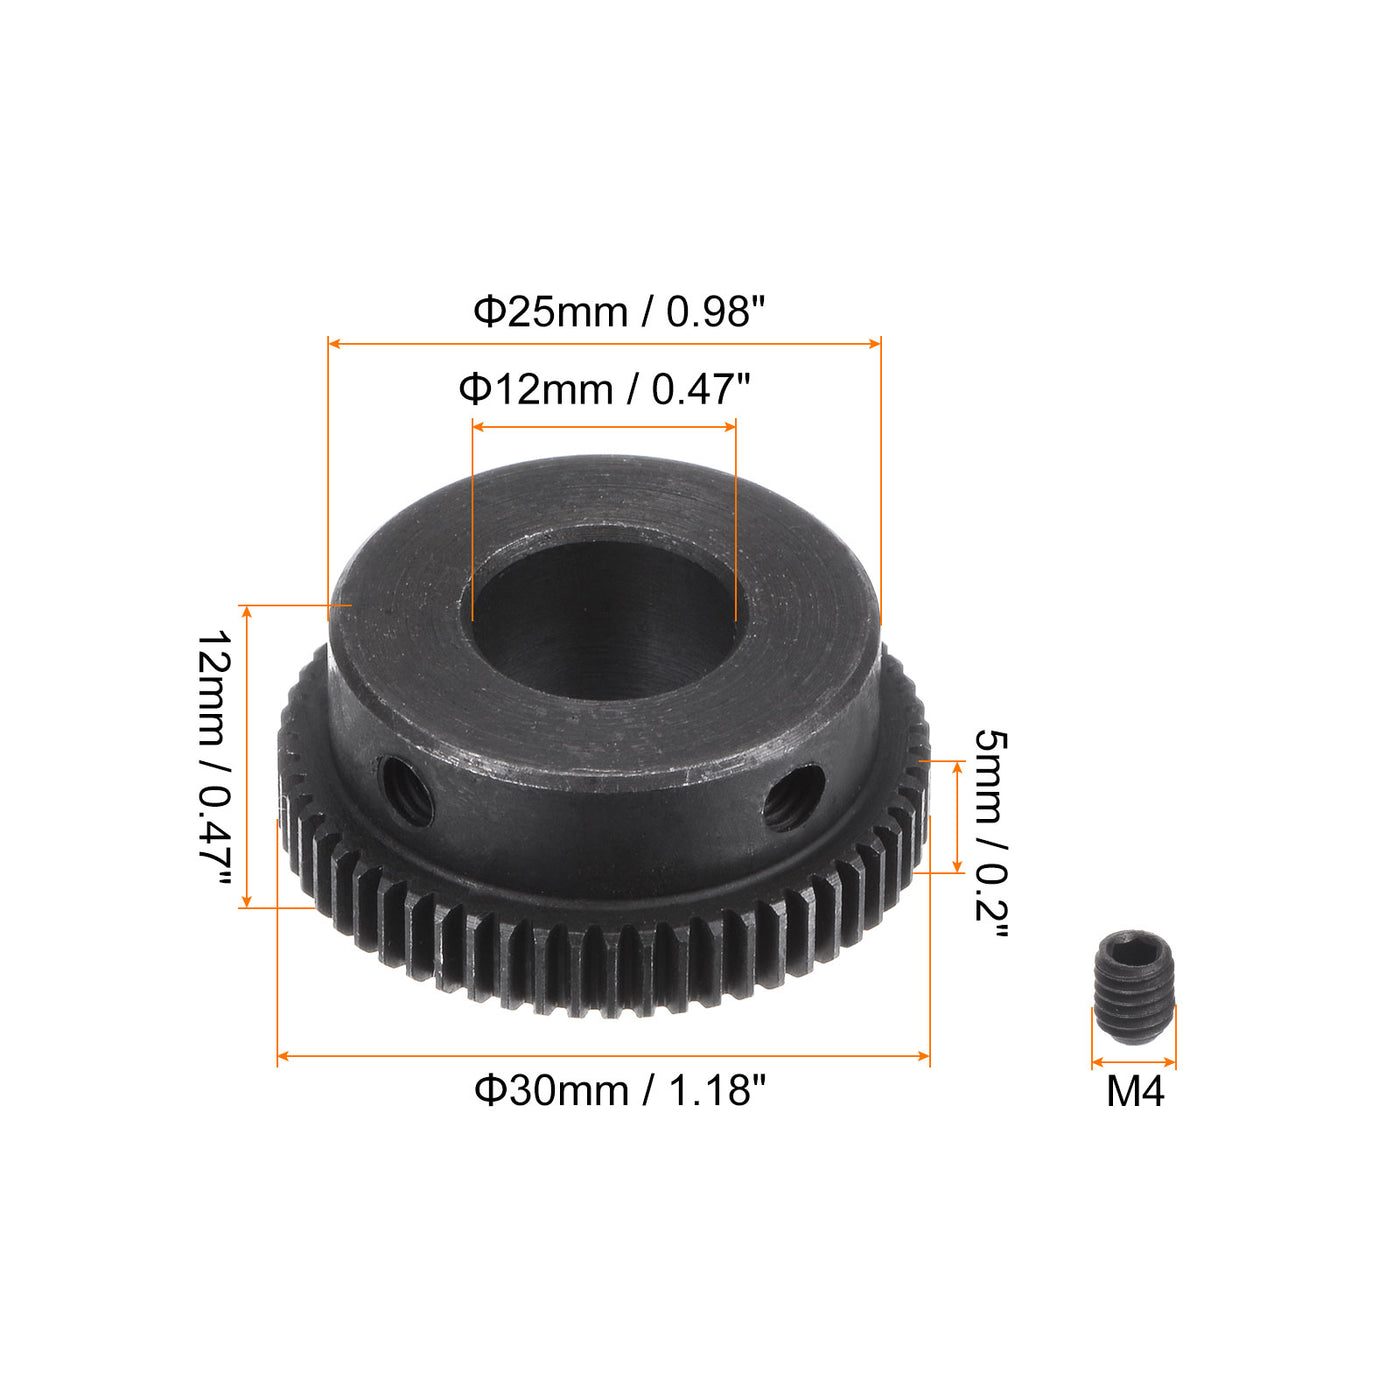 uxcell Uxcell 0.5 Mod 58T 12mm Bore 30mm Outer Dia 45# Carbon Steel Motor Pinion Gear Set